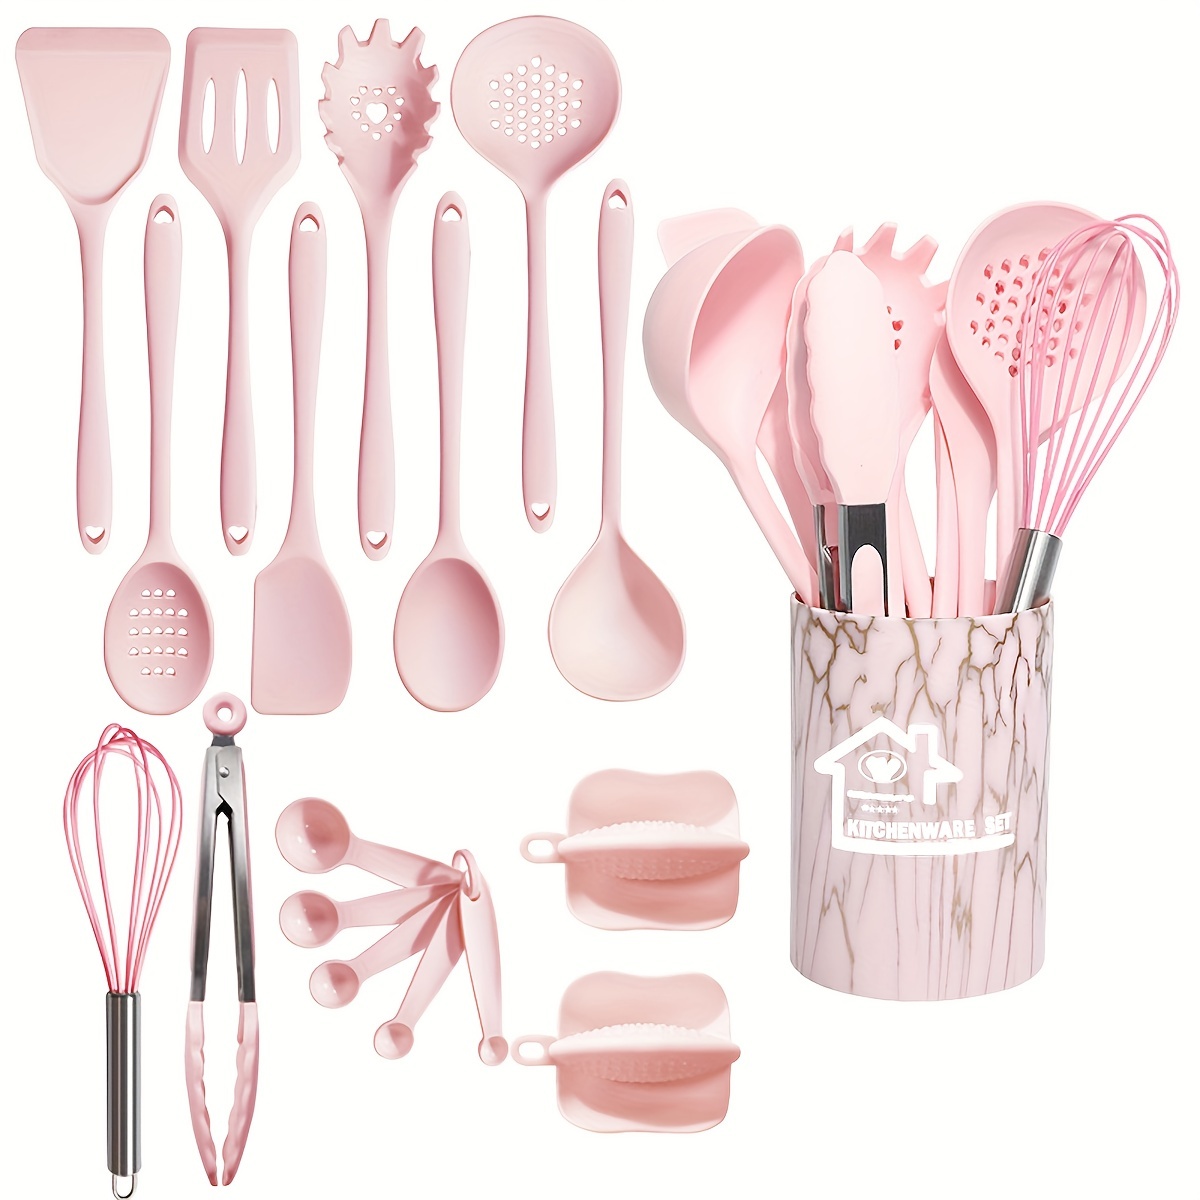 13pcs/set Heat Resistant Silicone Kitchen Utensils Set Including Measuring  Spoons, Oil Brush, Shovel, Tableware, Baking Tools With Storage Bucket